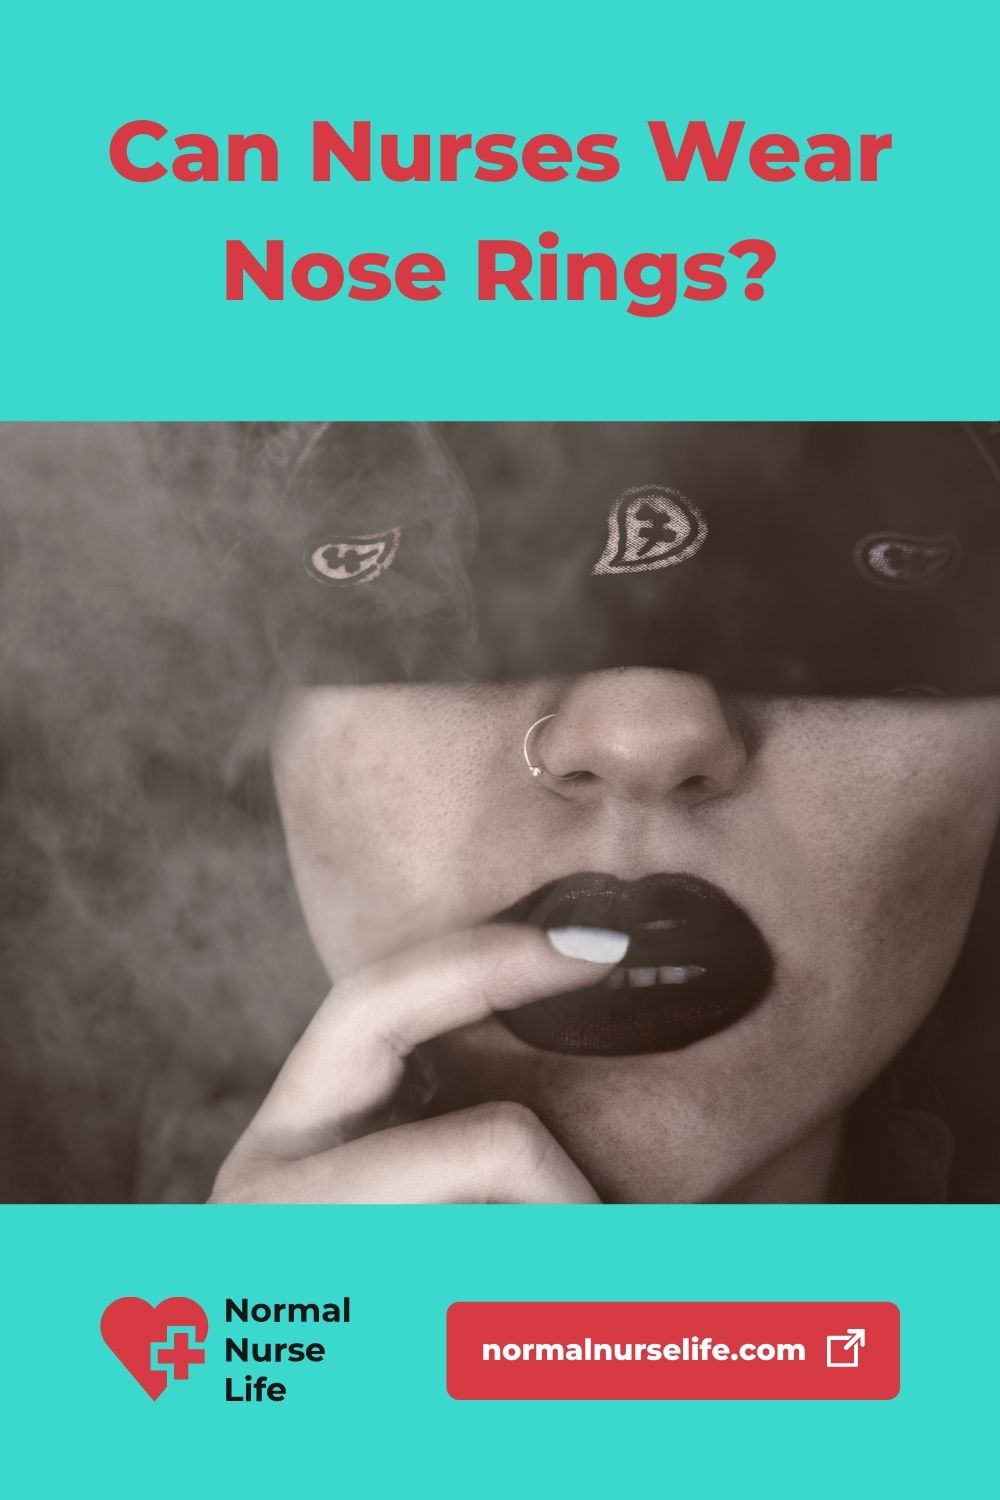 Can nurses wear nose rings or not